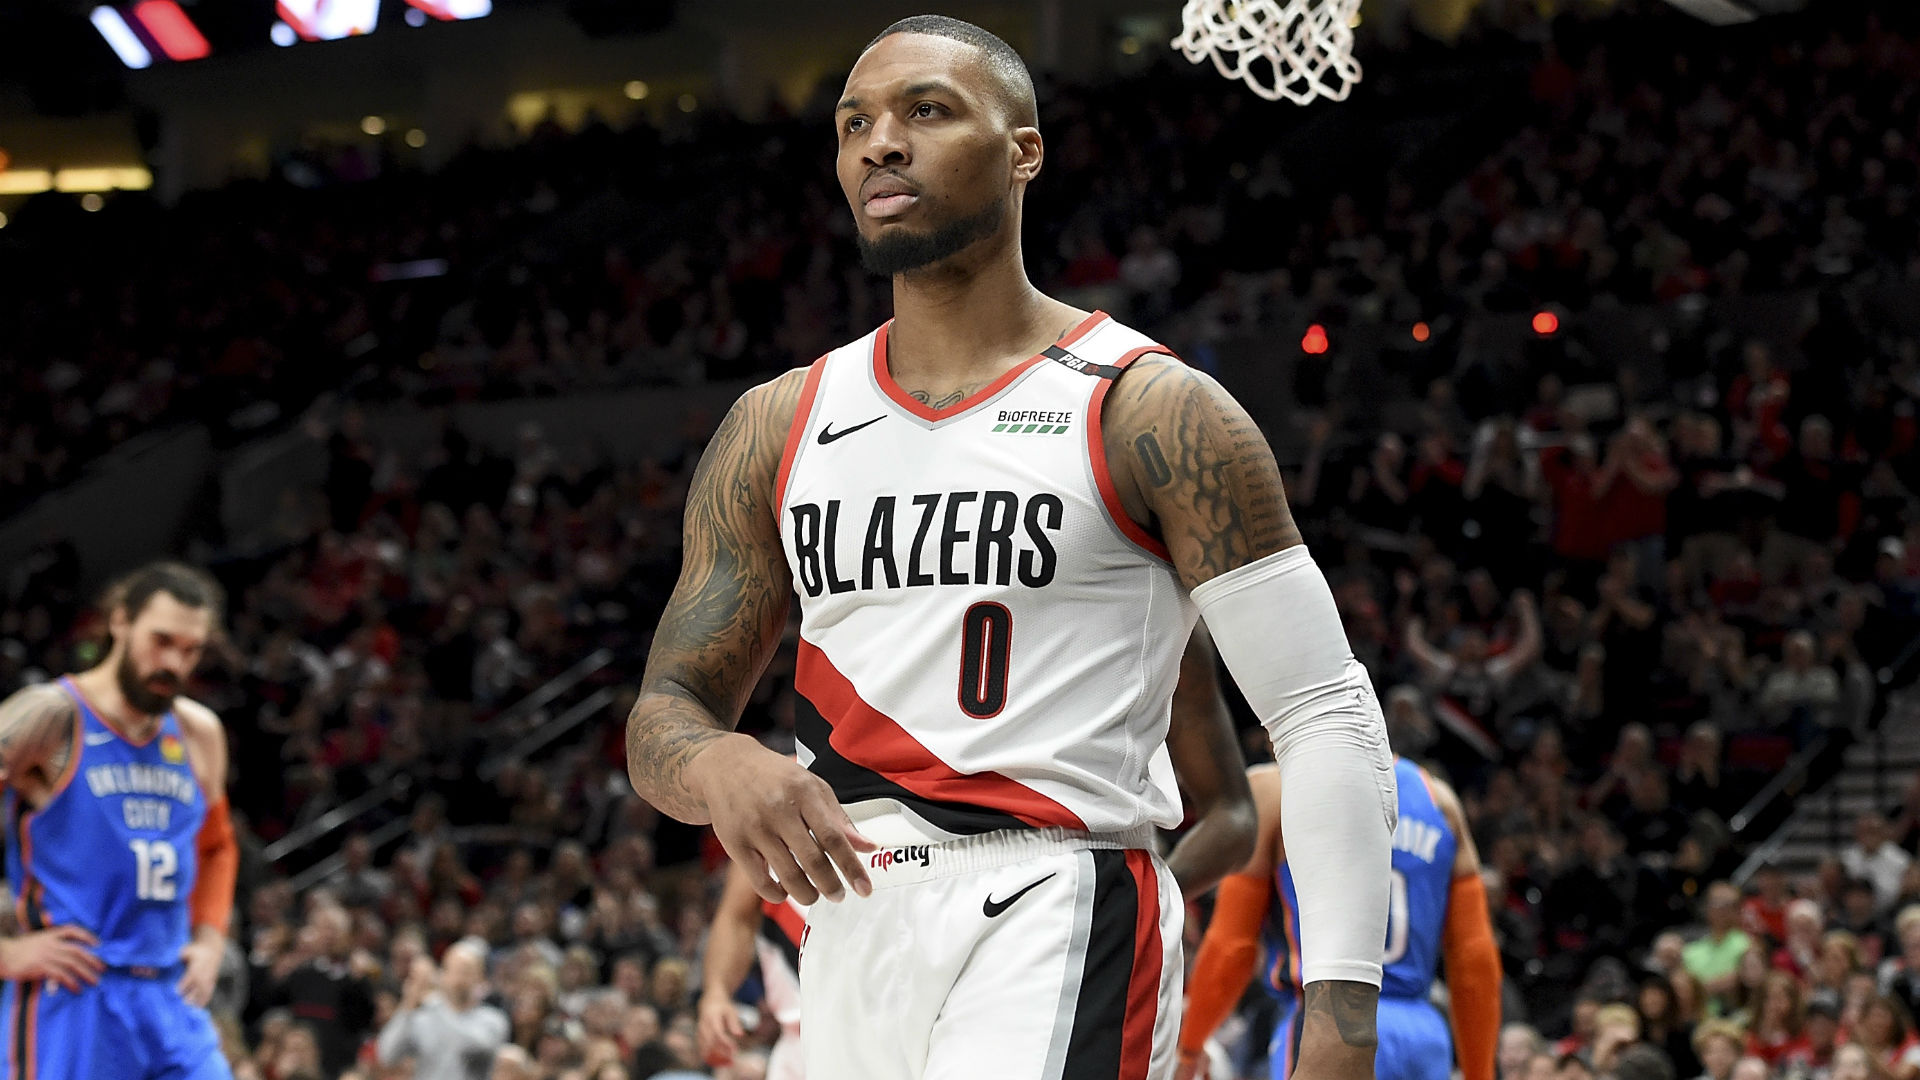 NBA Playoffs 2019: Damian Lillard says 'it's good to get back on the winning side, but ...1920 x 1080